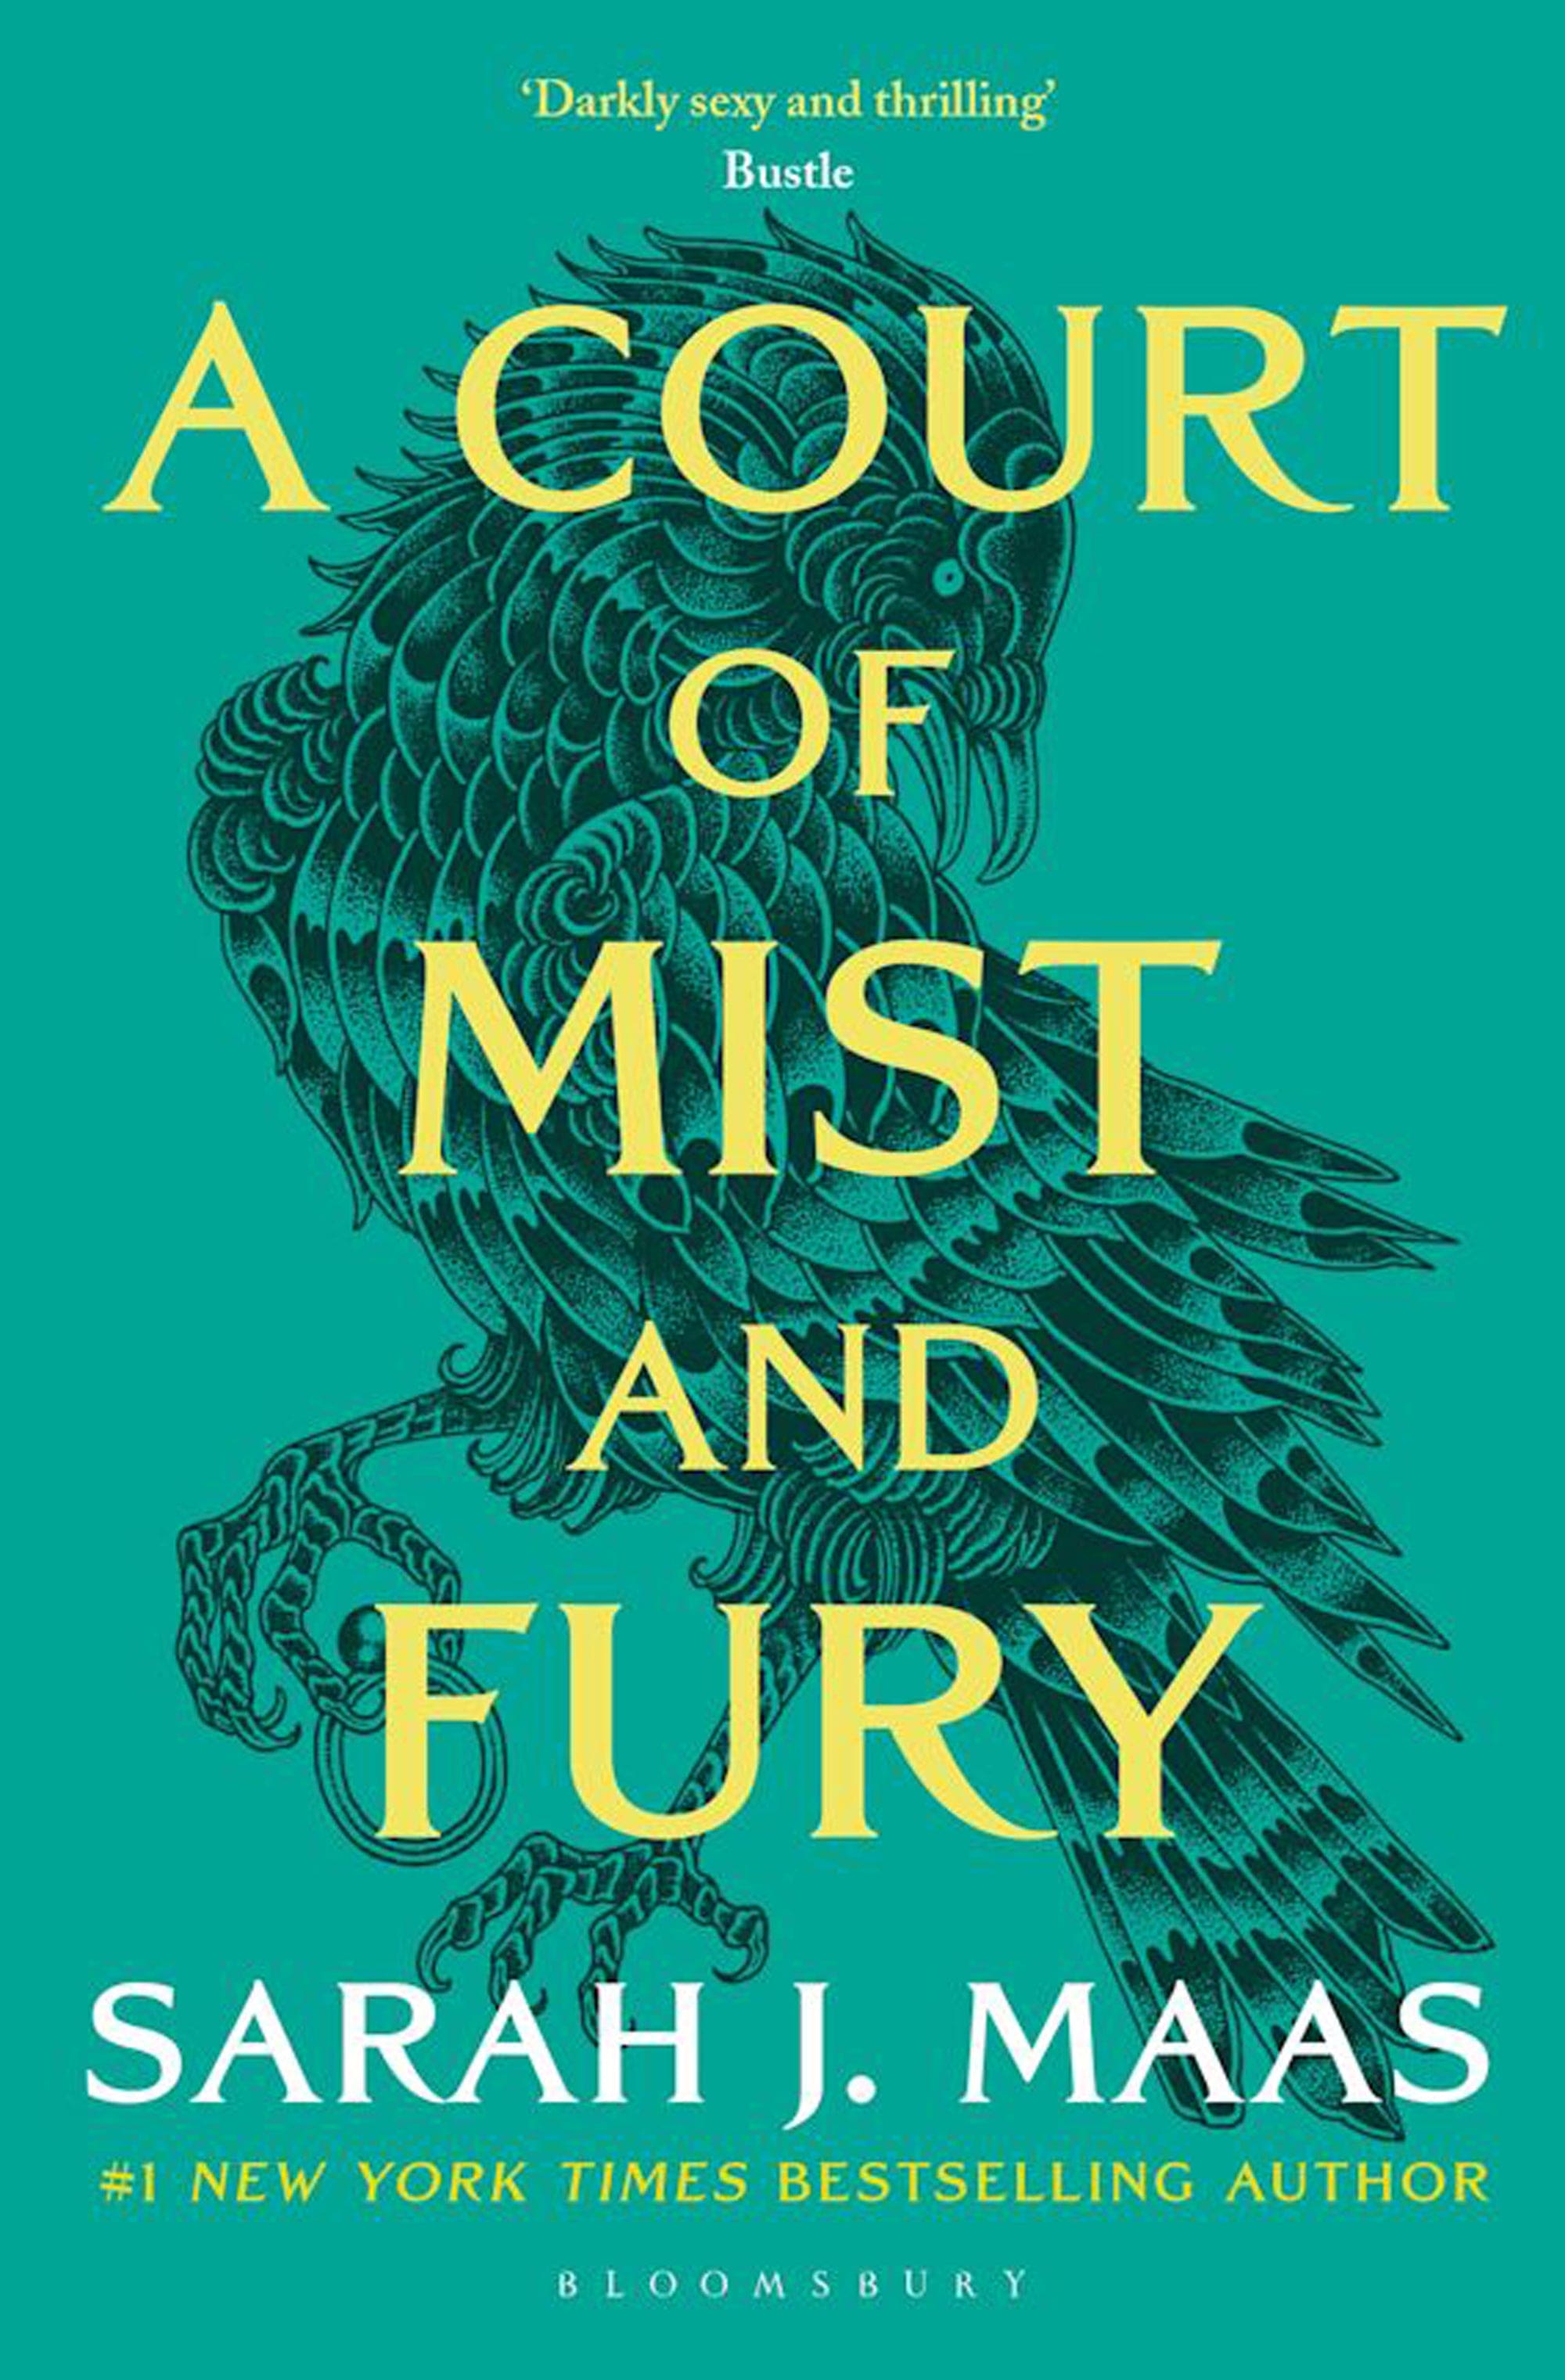 ACOTAR Book 2: A Court of Mist and Fury by Sarah J. Maas